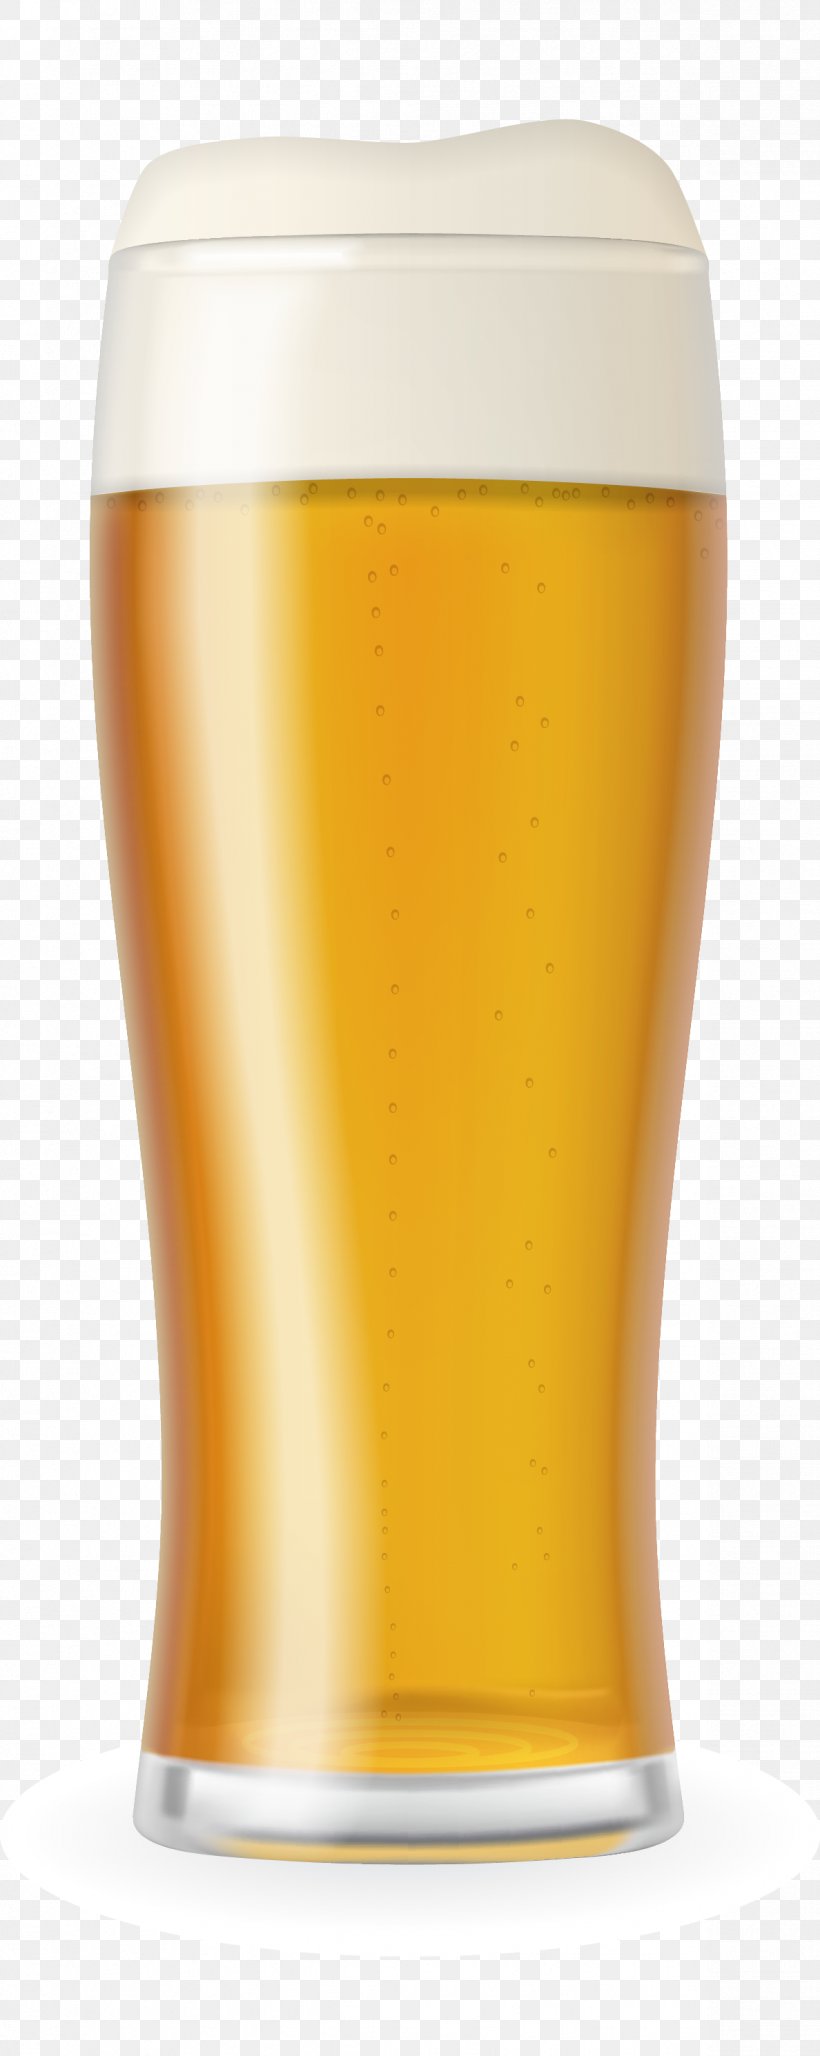 Wheat Beer Pint Glass Beer Glasses, PNG, 1188x2980px, Wheat Beer, Beer, Beer Glass, Beer Glasses, Common Wheat Download Free